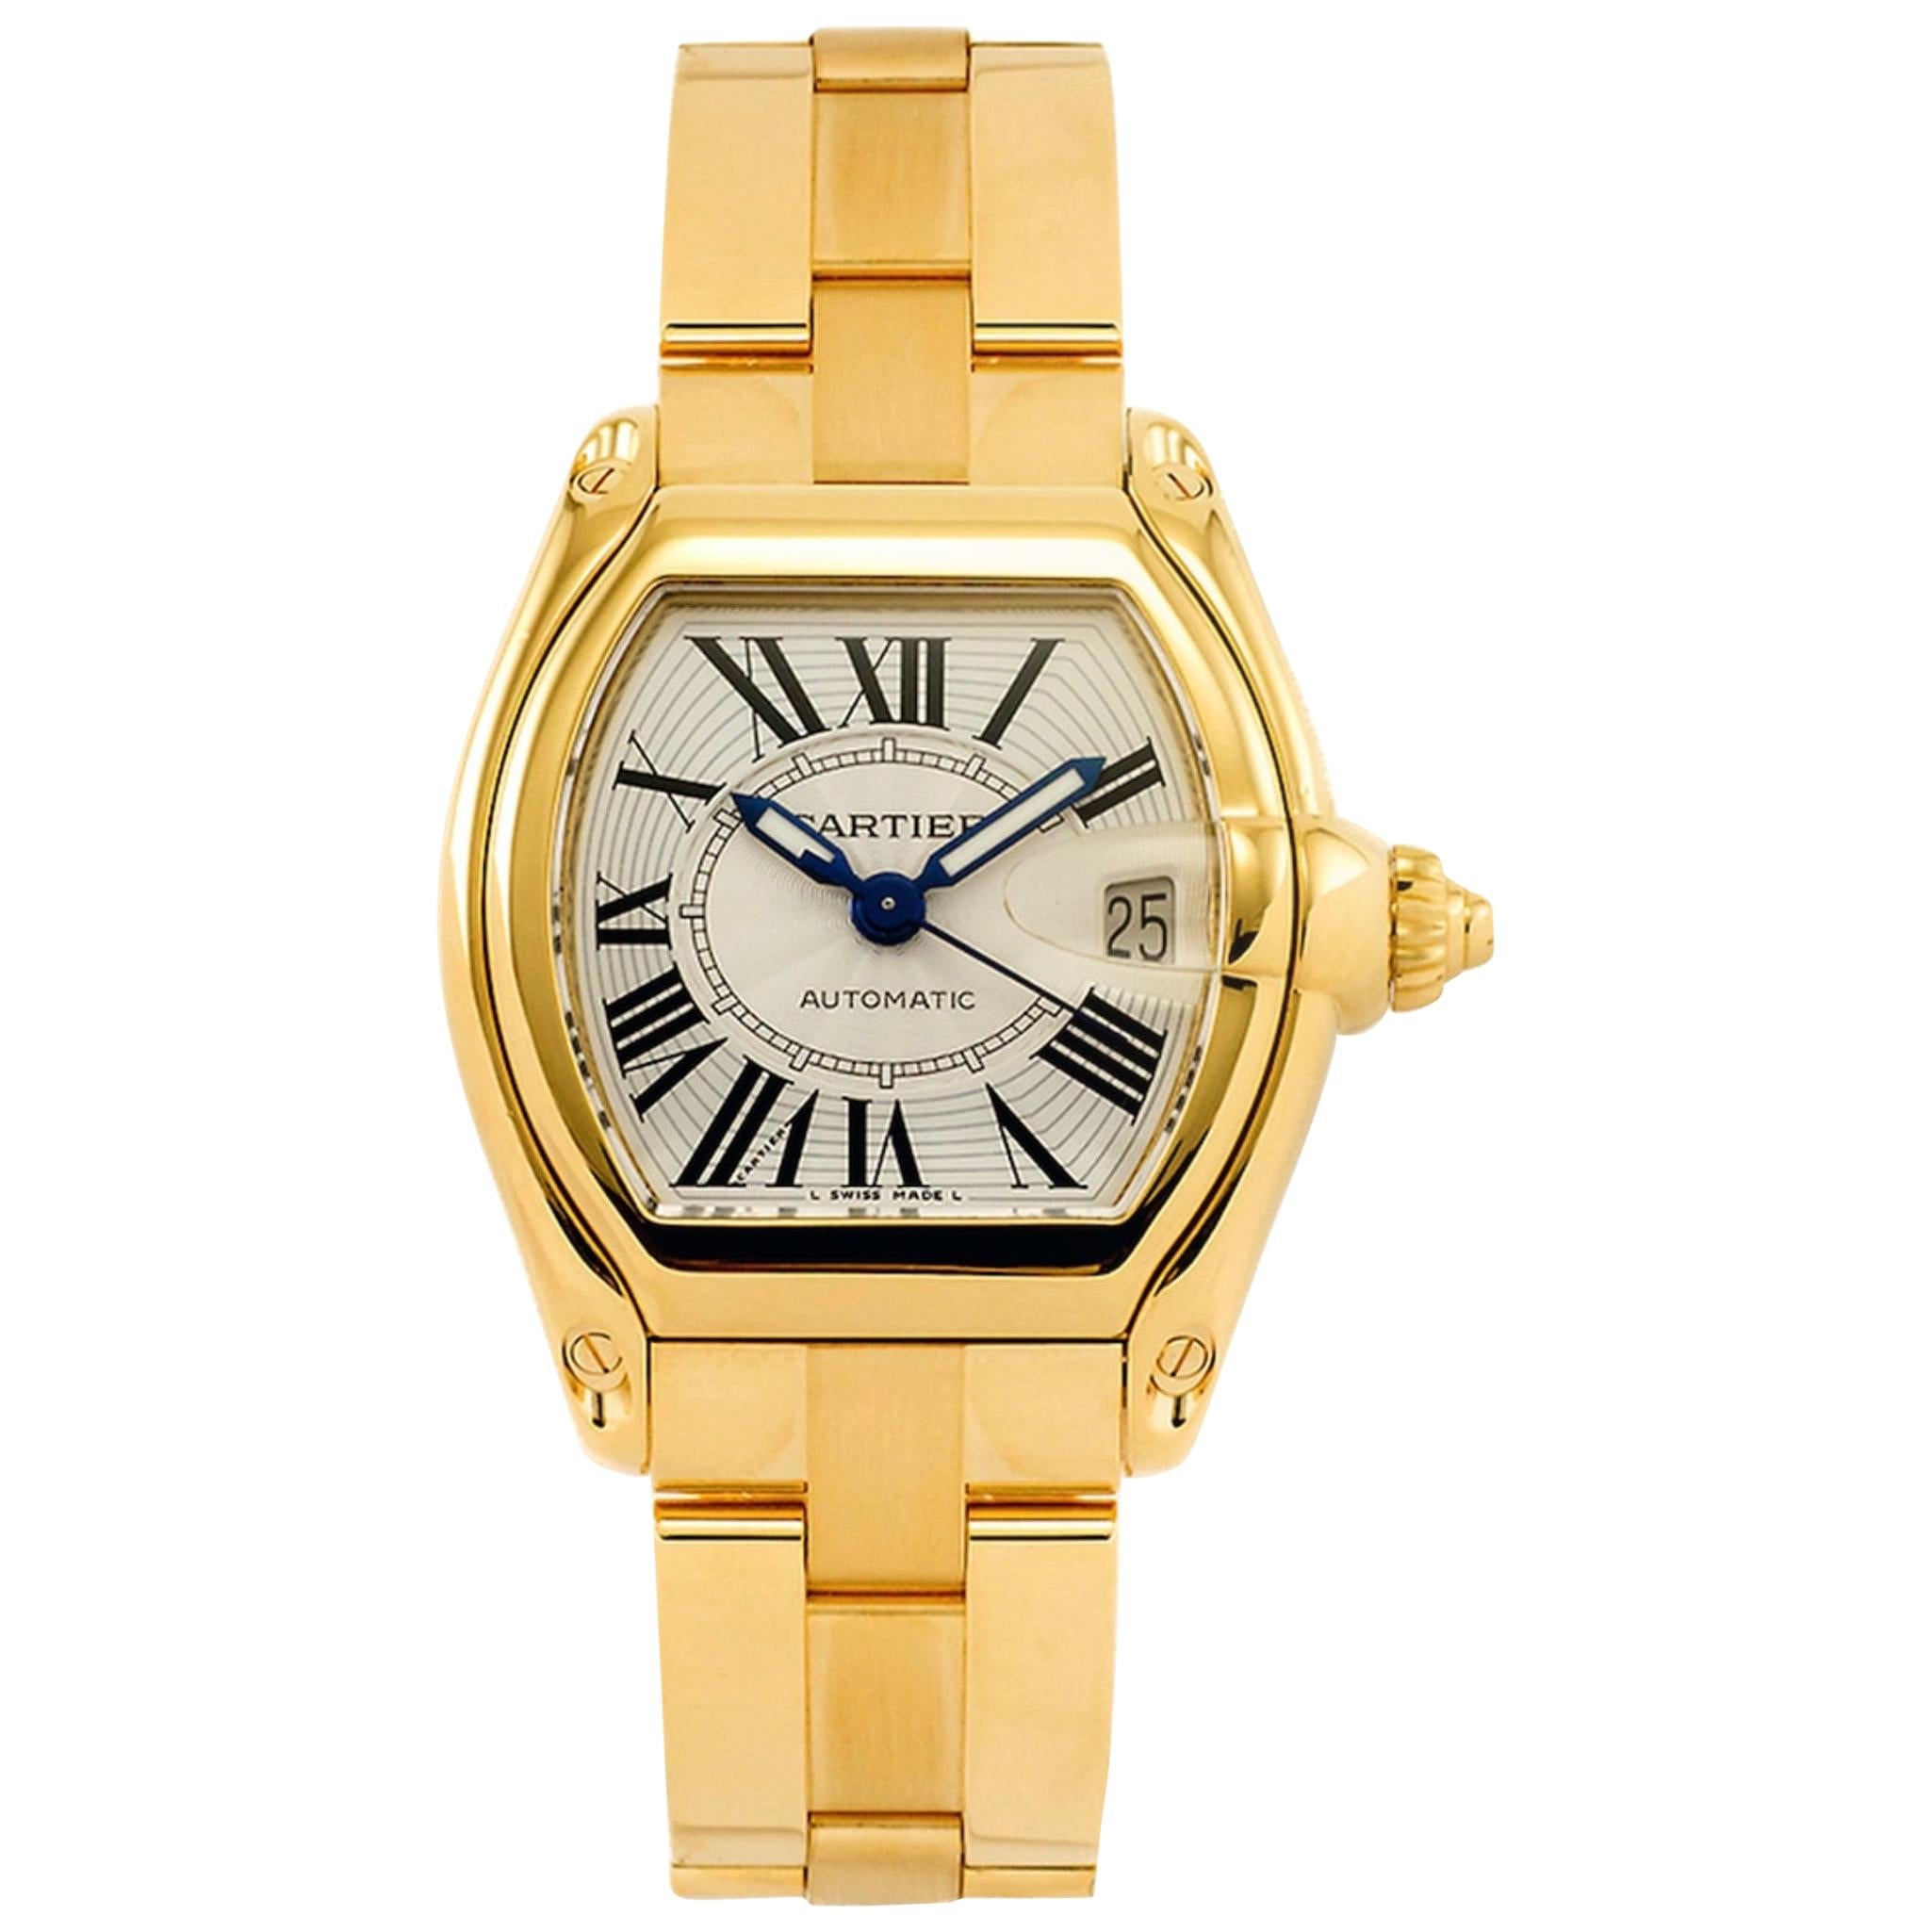 Cartier Roadster 201 Gm 18 Karat Solid Yellow Gold Large Model Automatic Watch